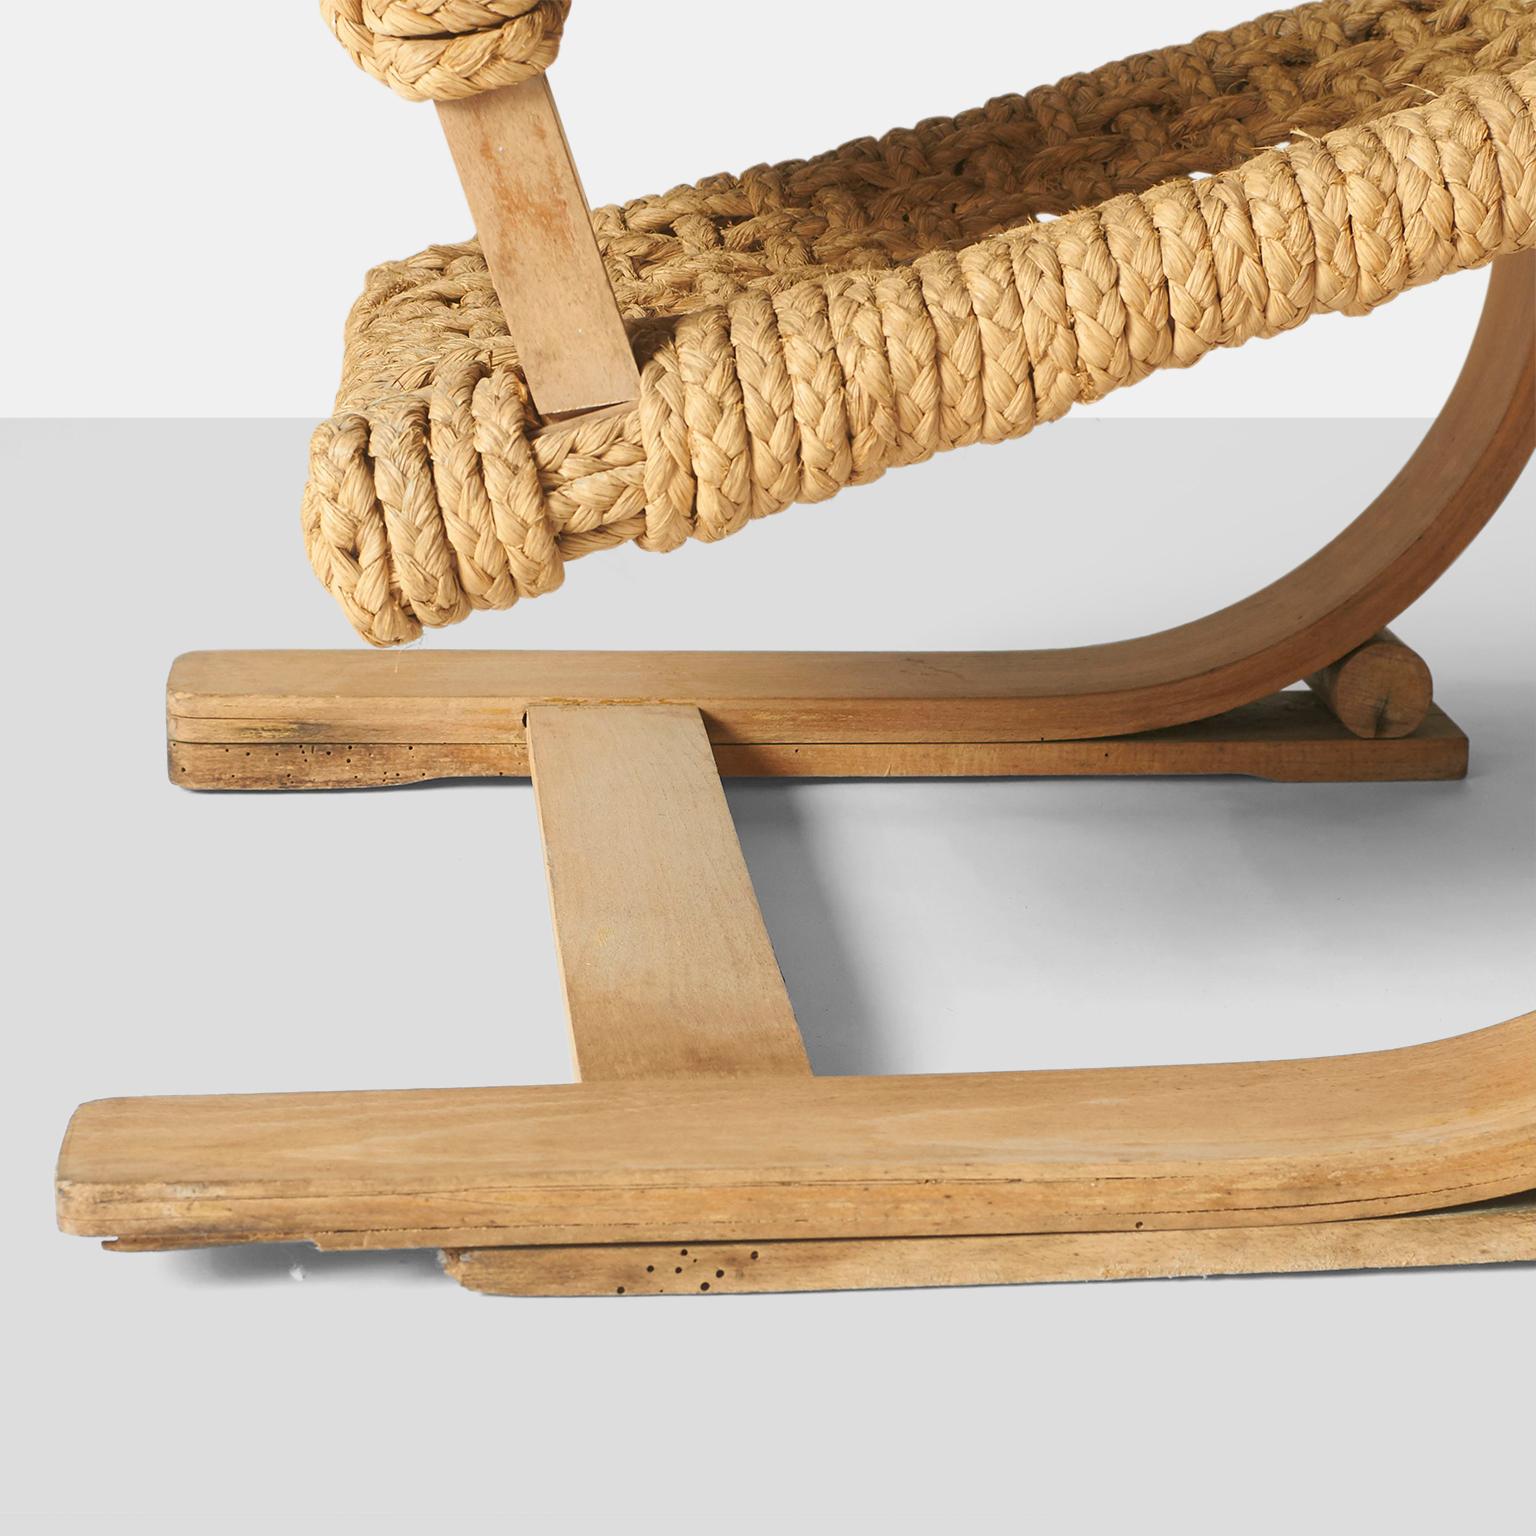 Hand-Crafted 1 Audoux-Minet, Rope Chair